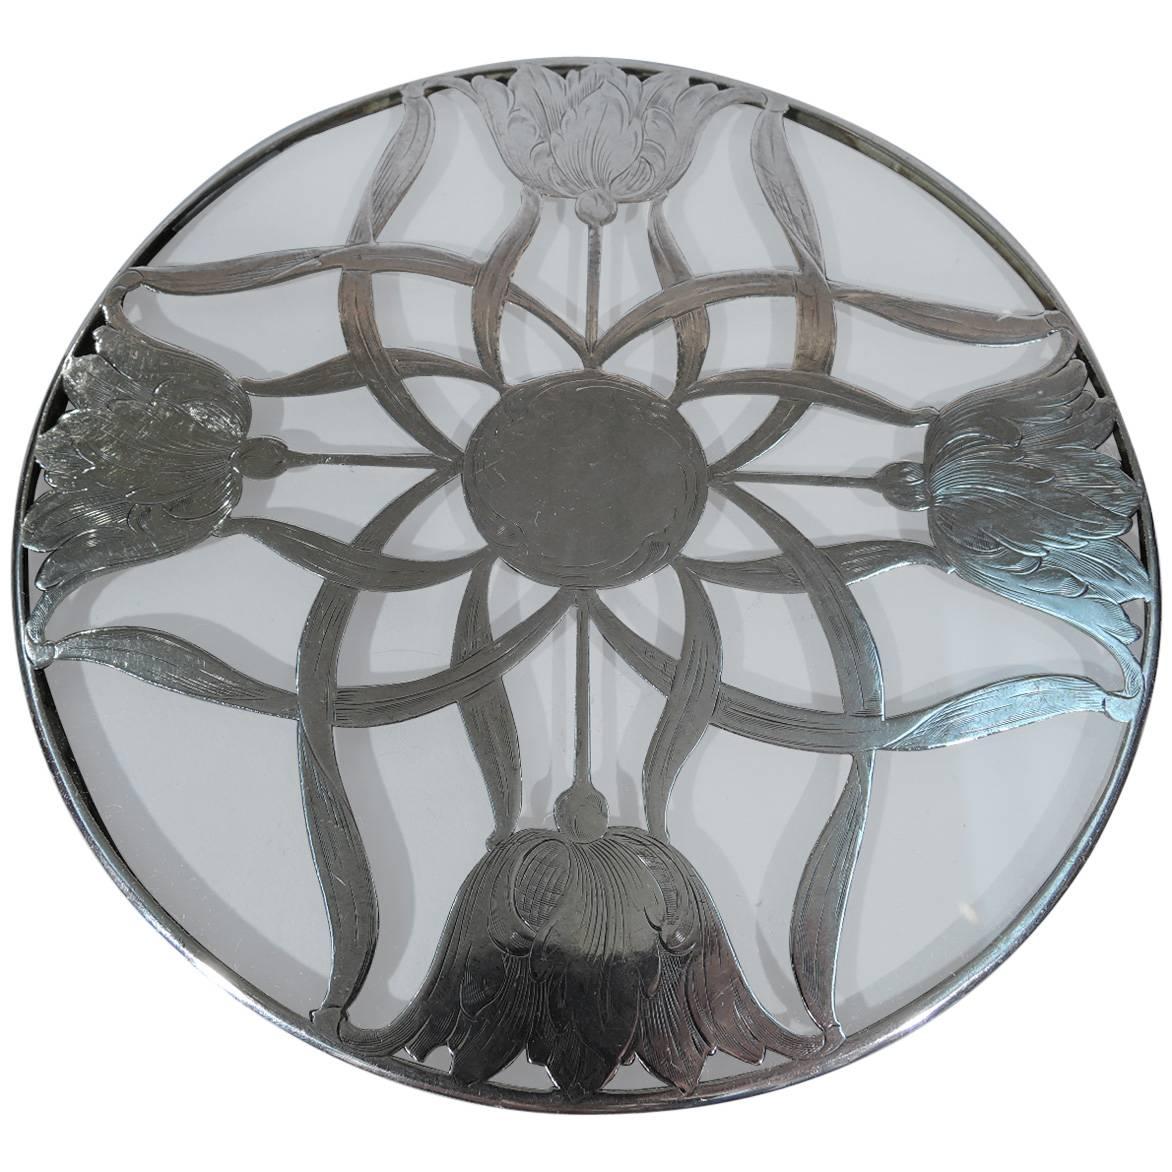 American Art Nouveau Silver Overlay Trivet with Flowers